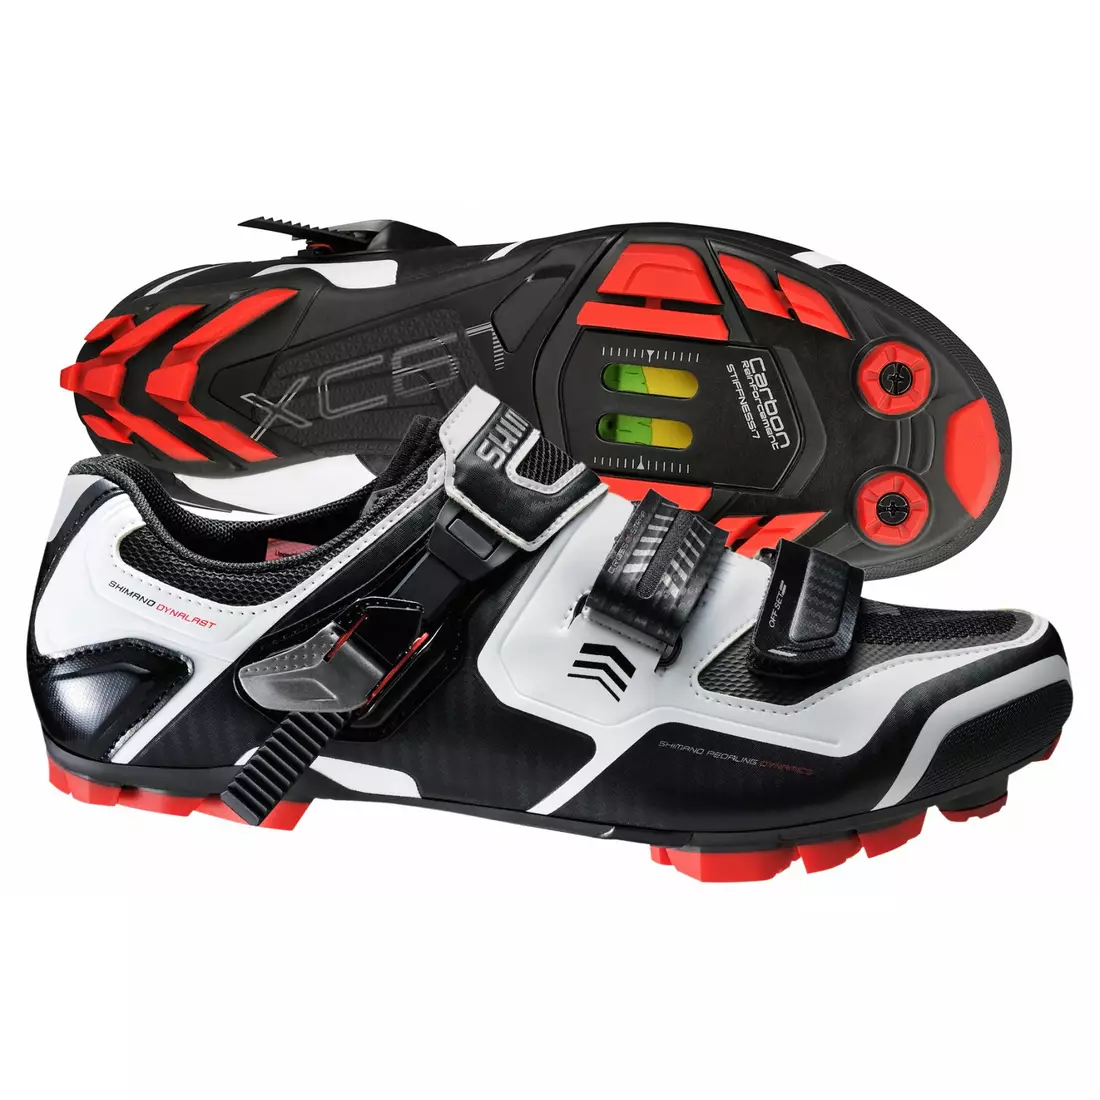 SHIMANO SH-XC61 - MTB cycling shoes, color: white and black